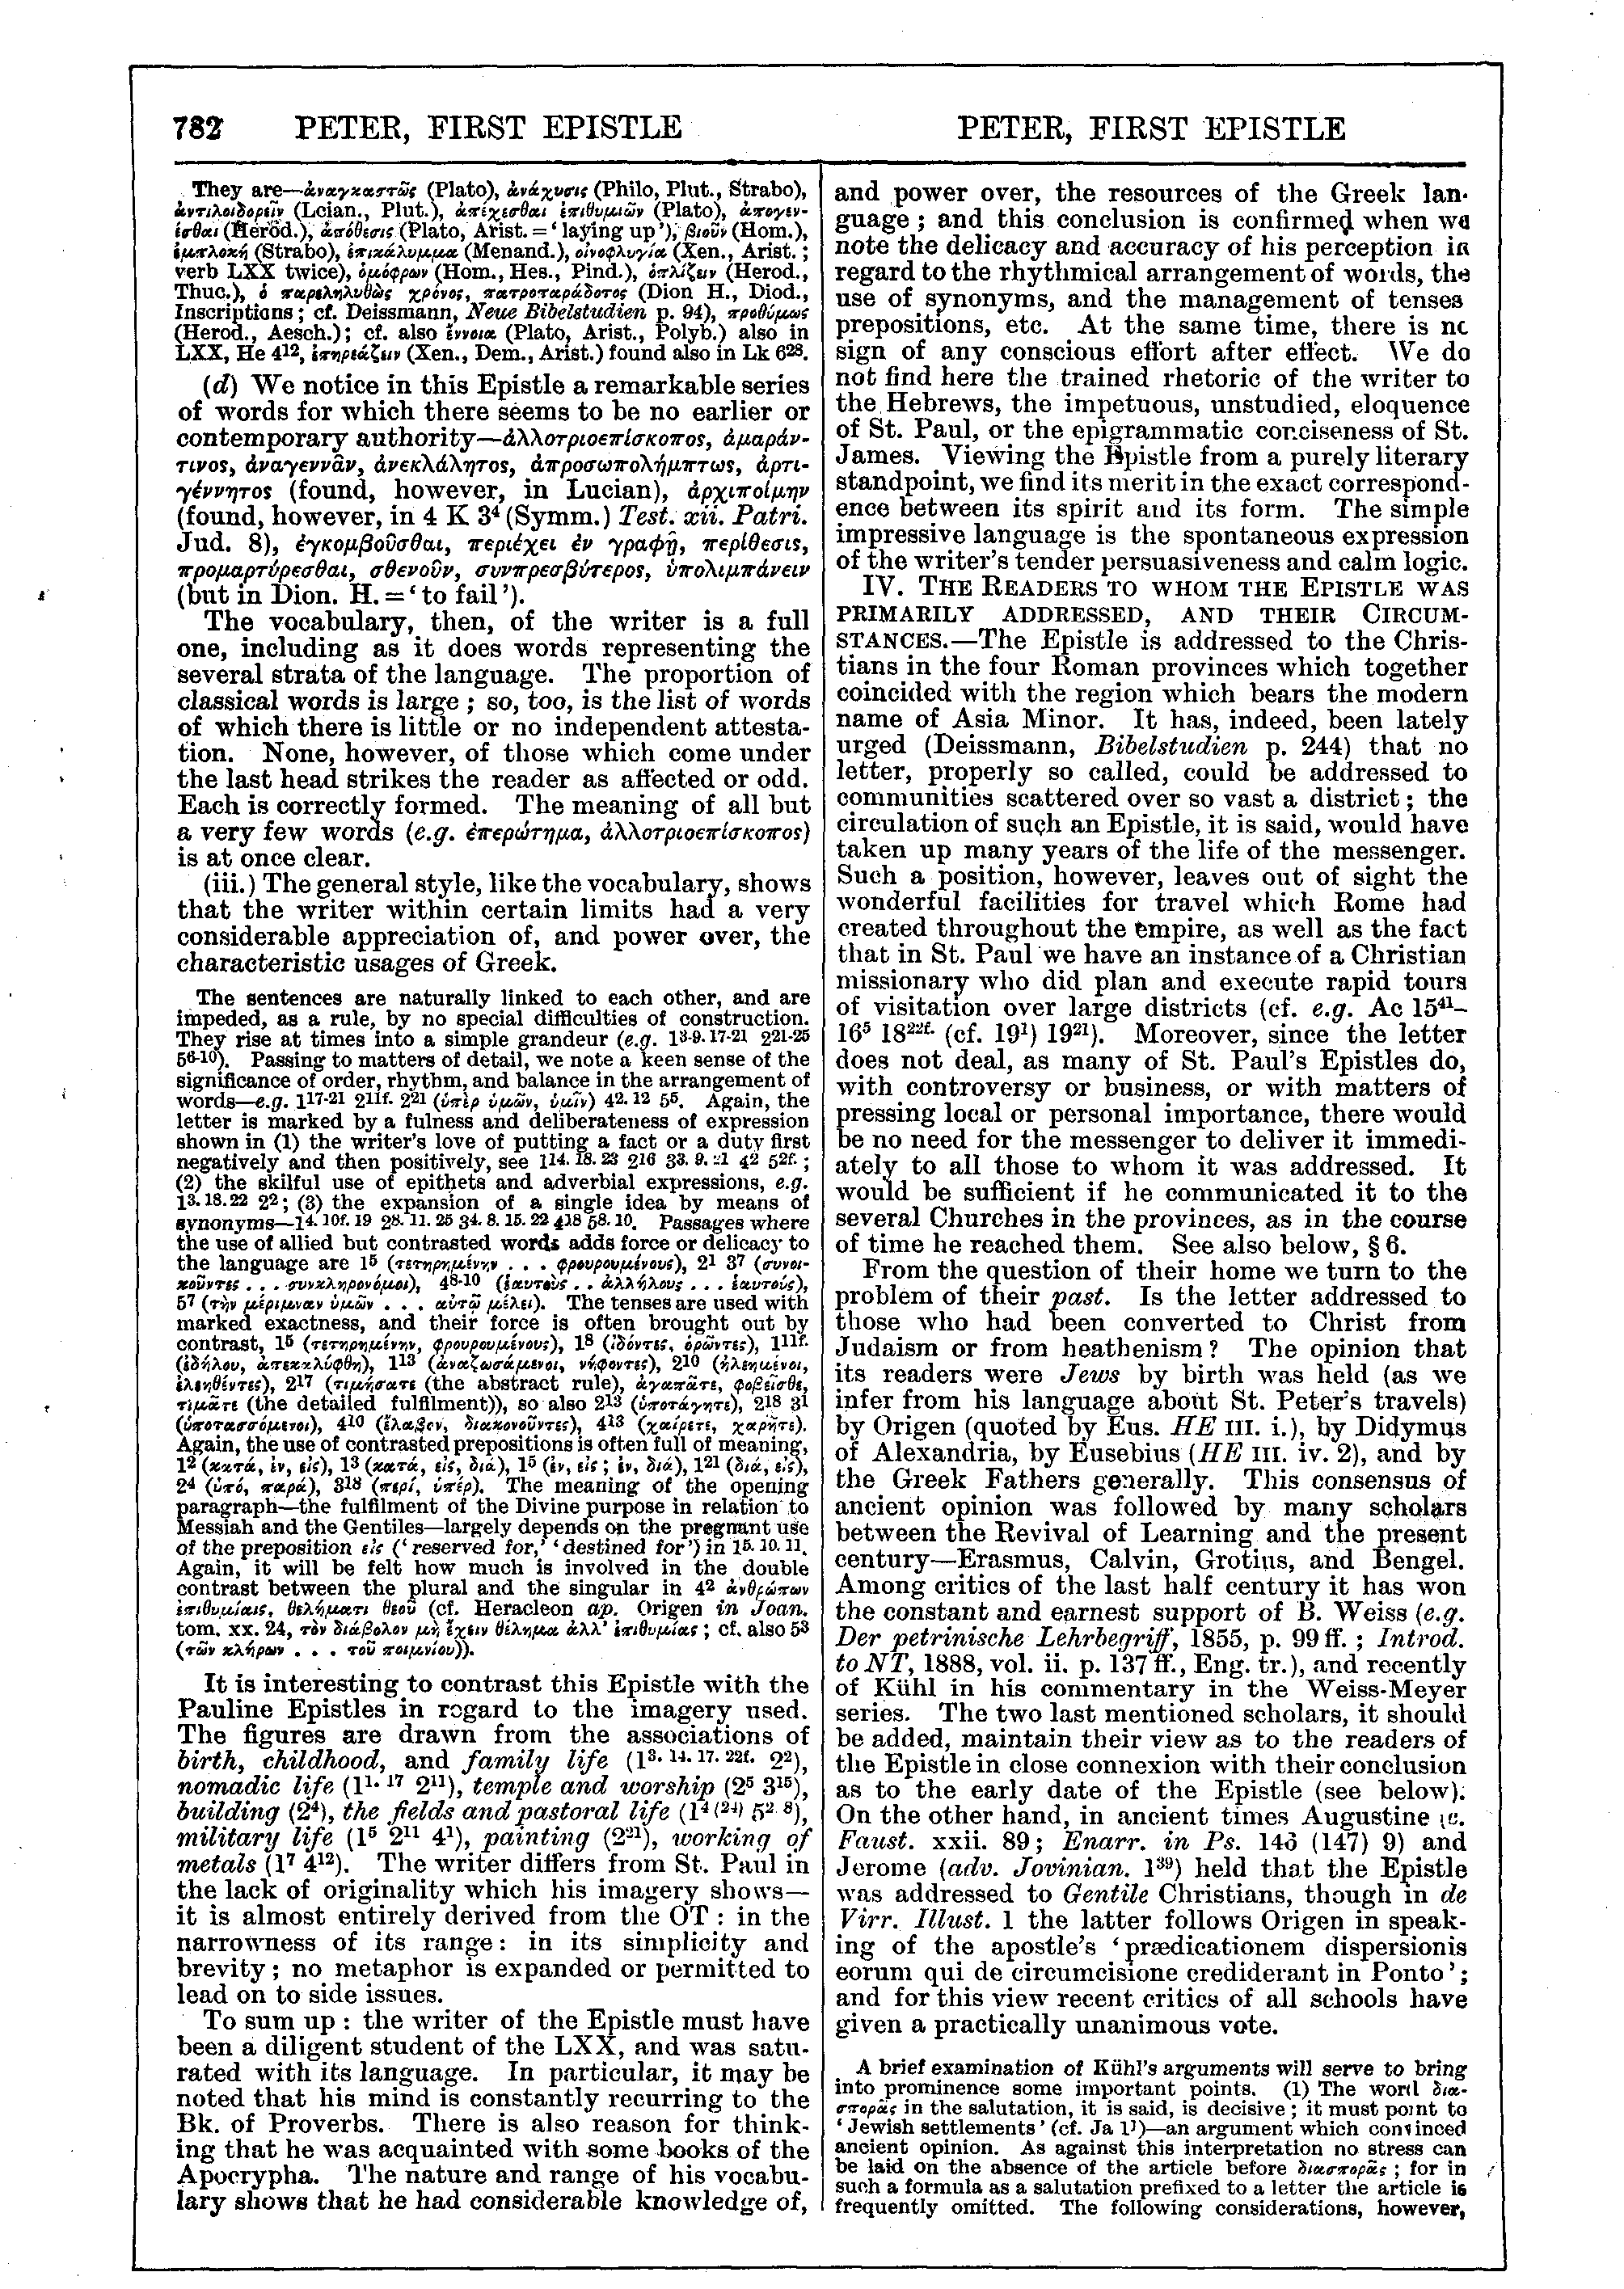 Image of page 782